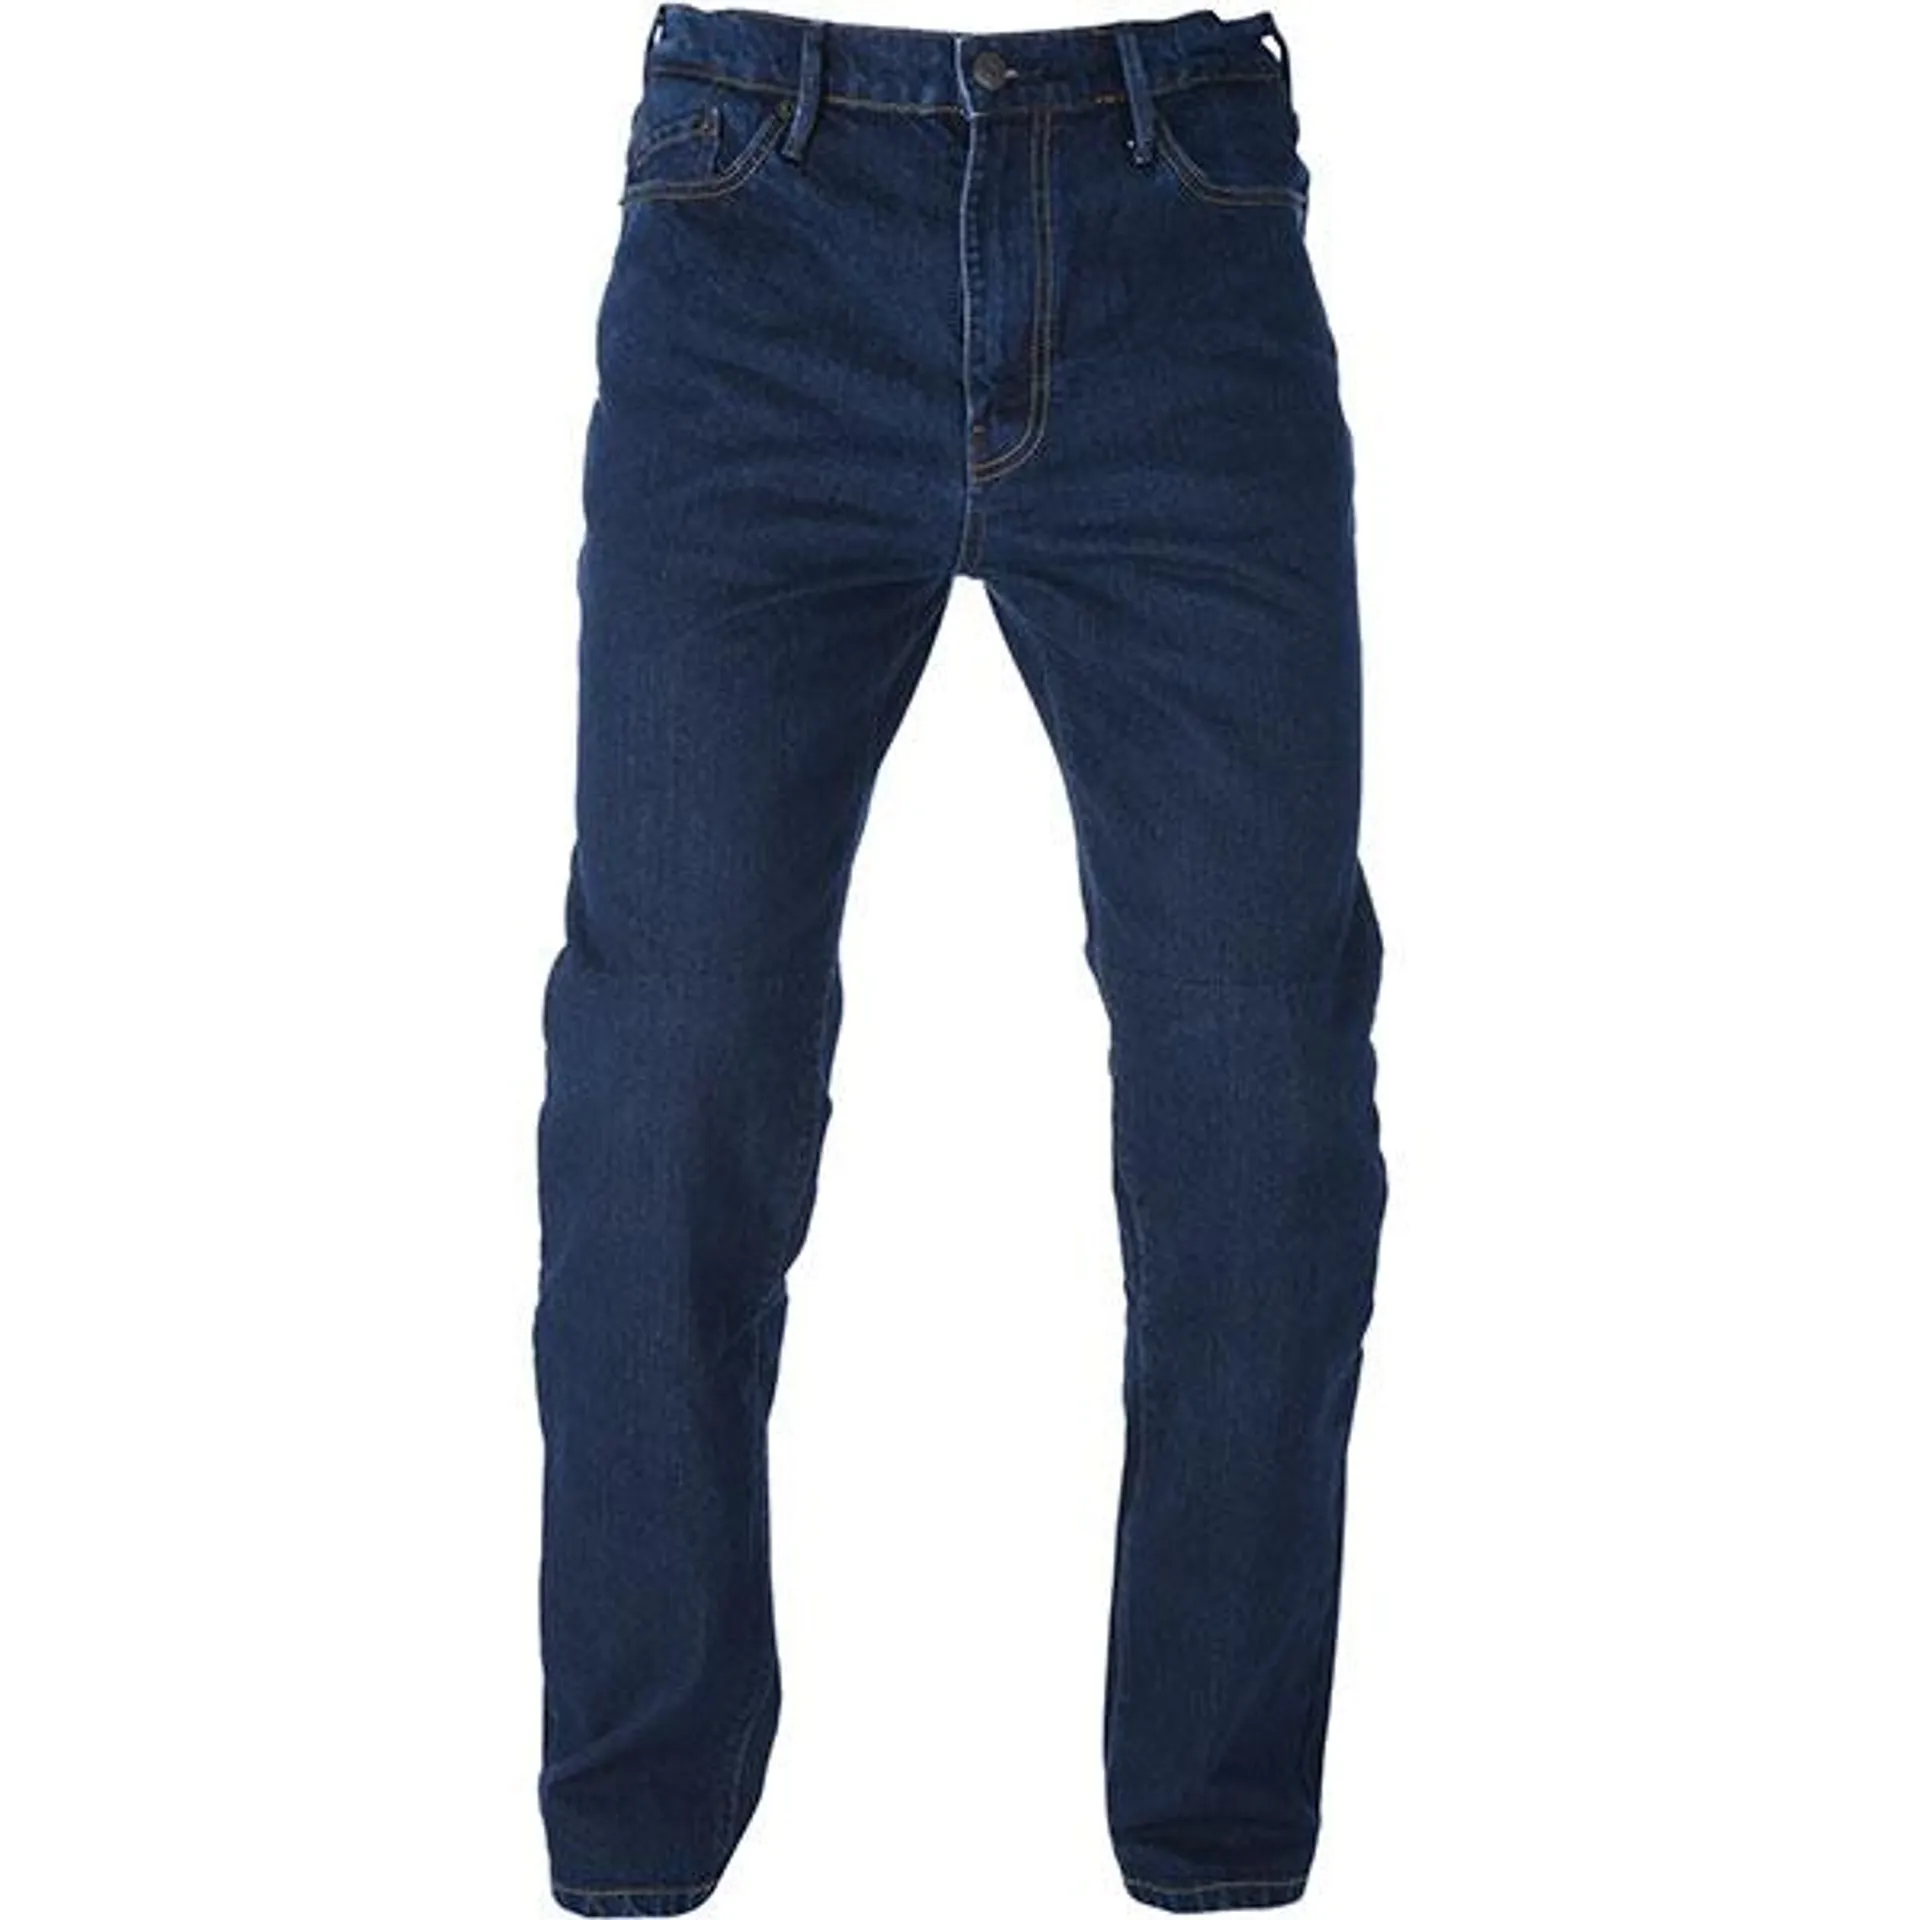 Oxford Original Approved Denim Jeans Straight Fit - Rinse Wash